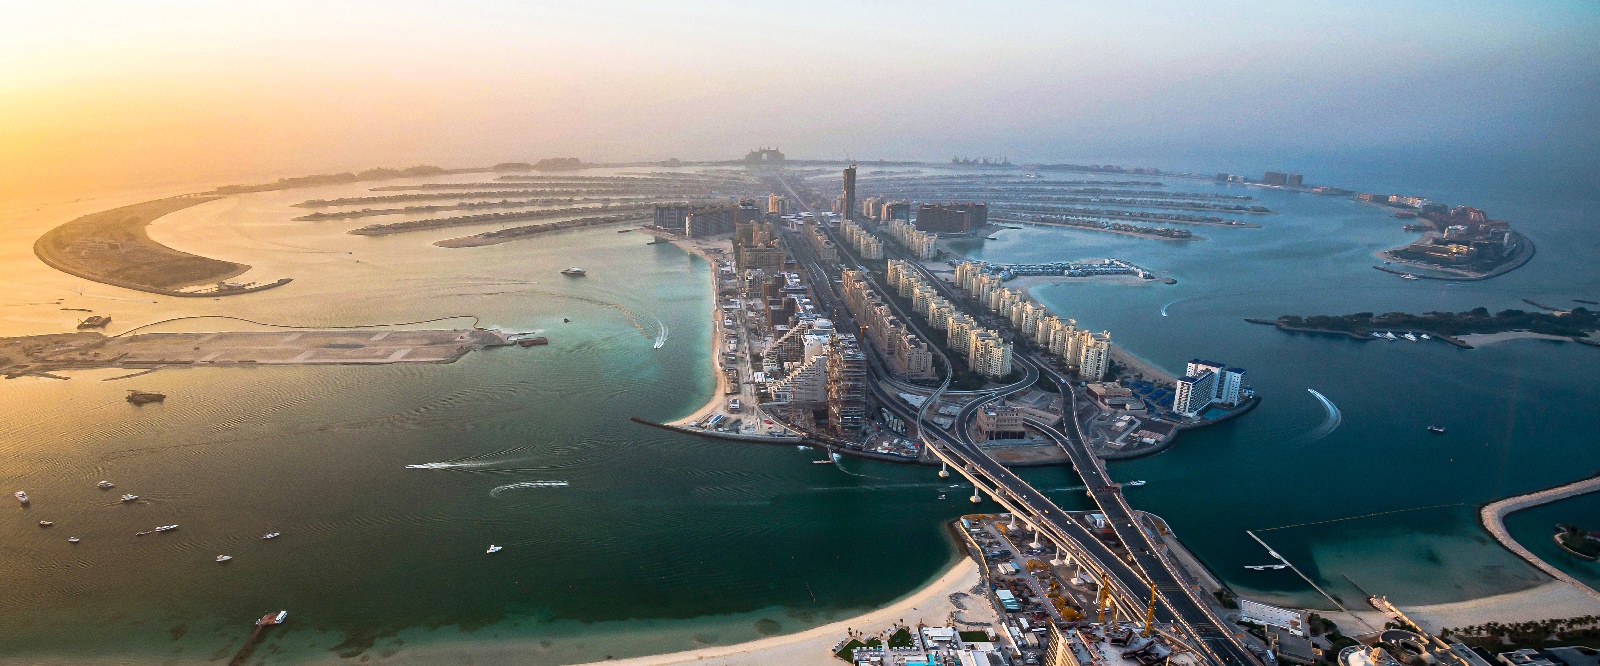 latest-project-in-dubai-palm-beach-towers-for-sale-in-palm-jumeirah